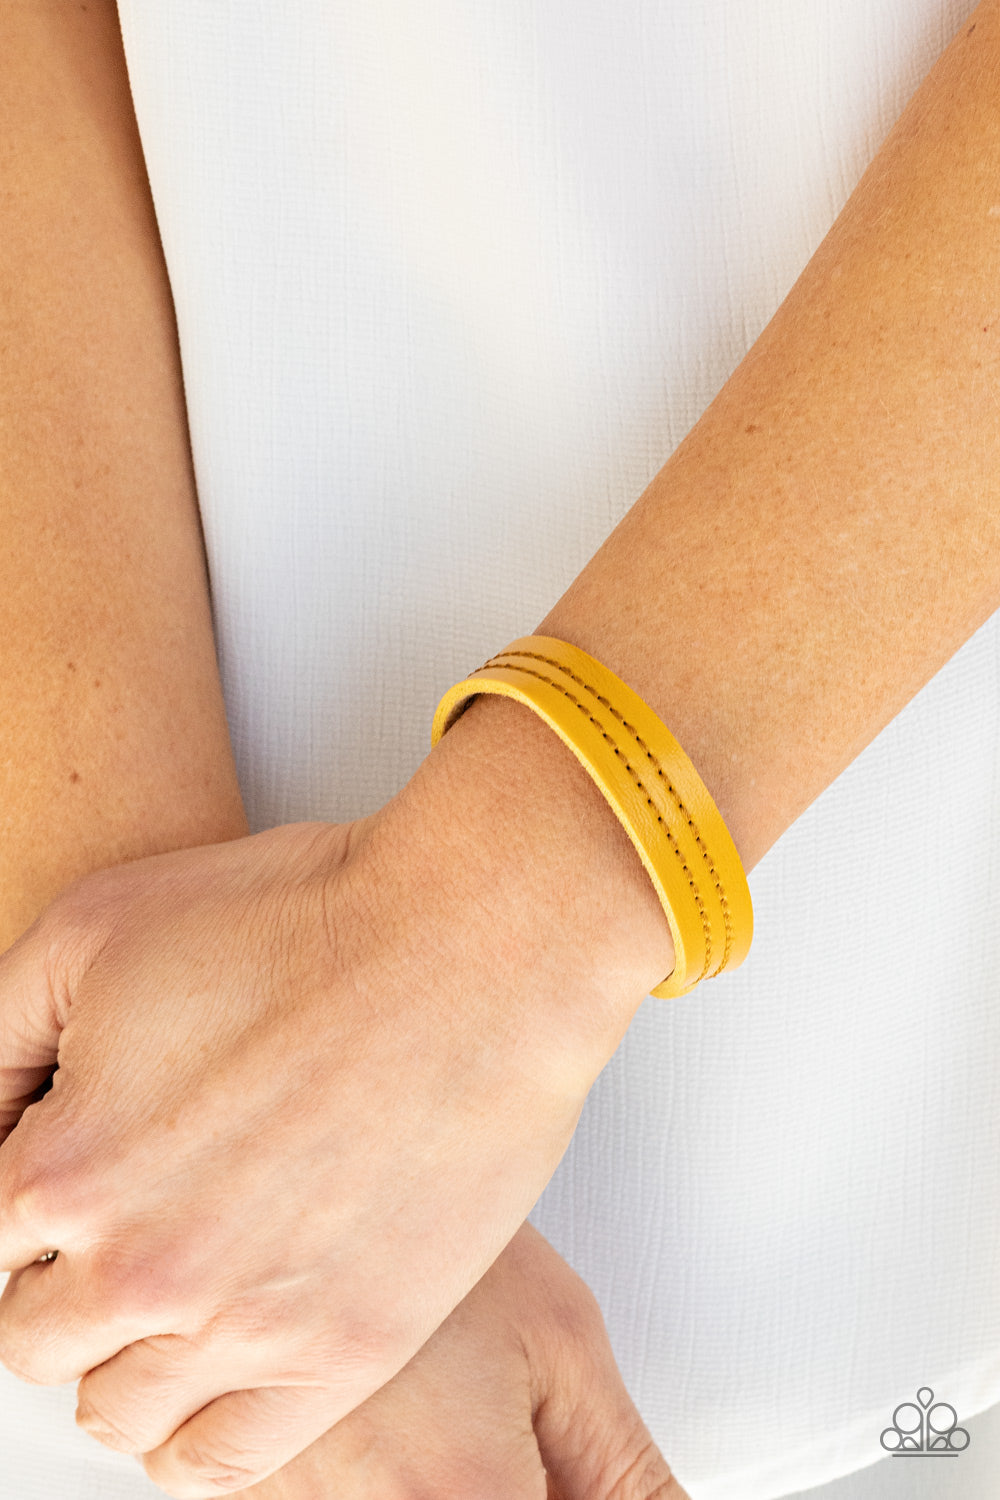 PRE-ORDER - Paparazzi Life is WANDER-ful - Yellow Leather - Bracelet - $5 Jewelry with Ashley Swint